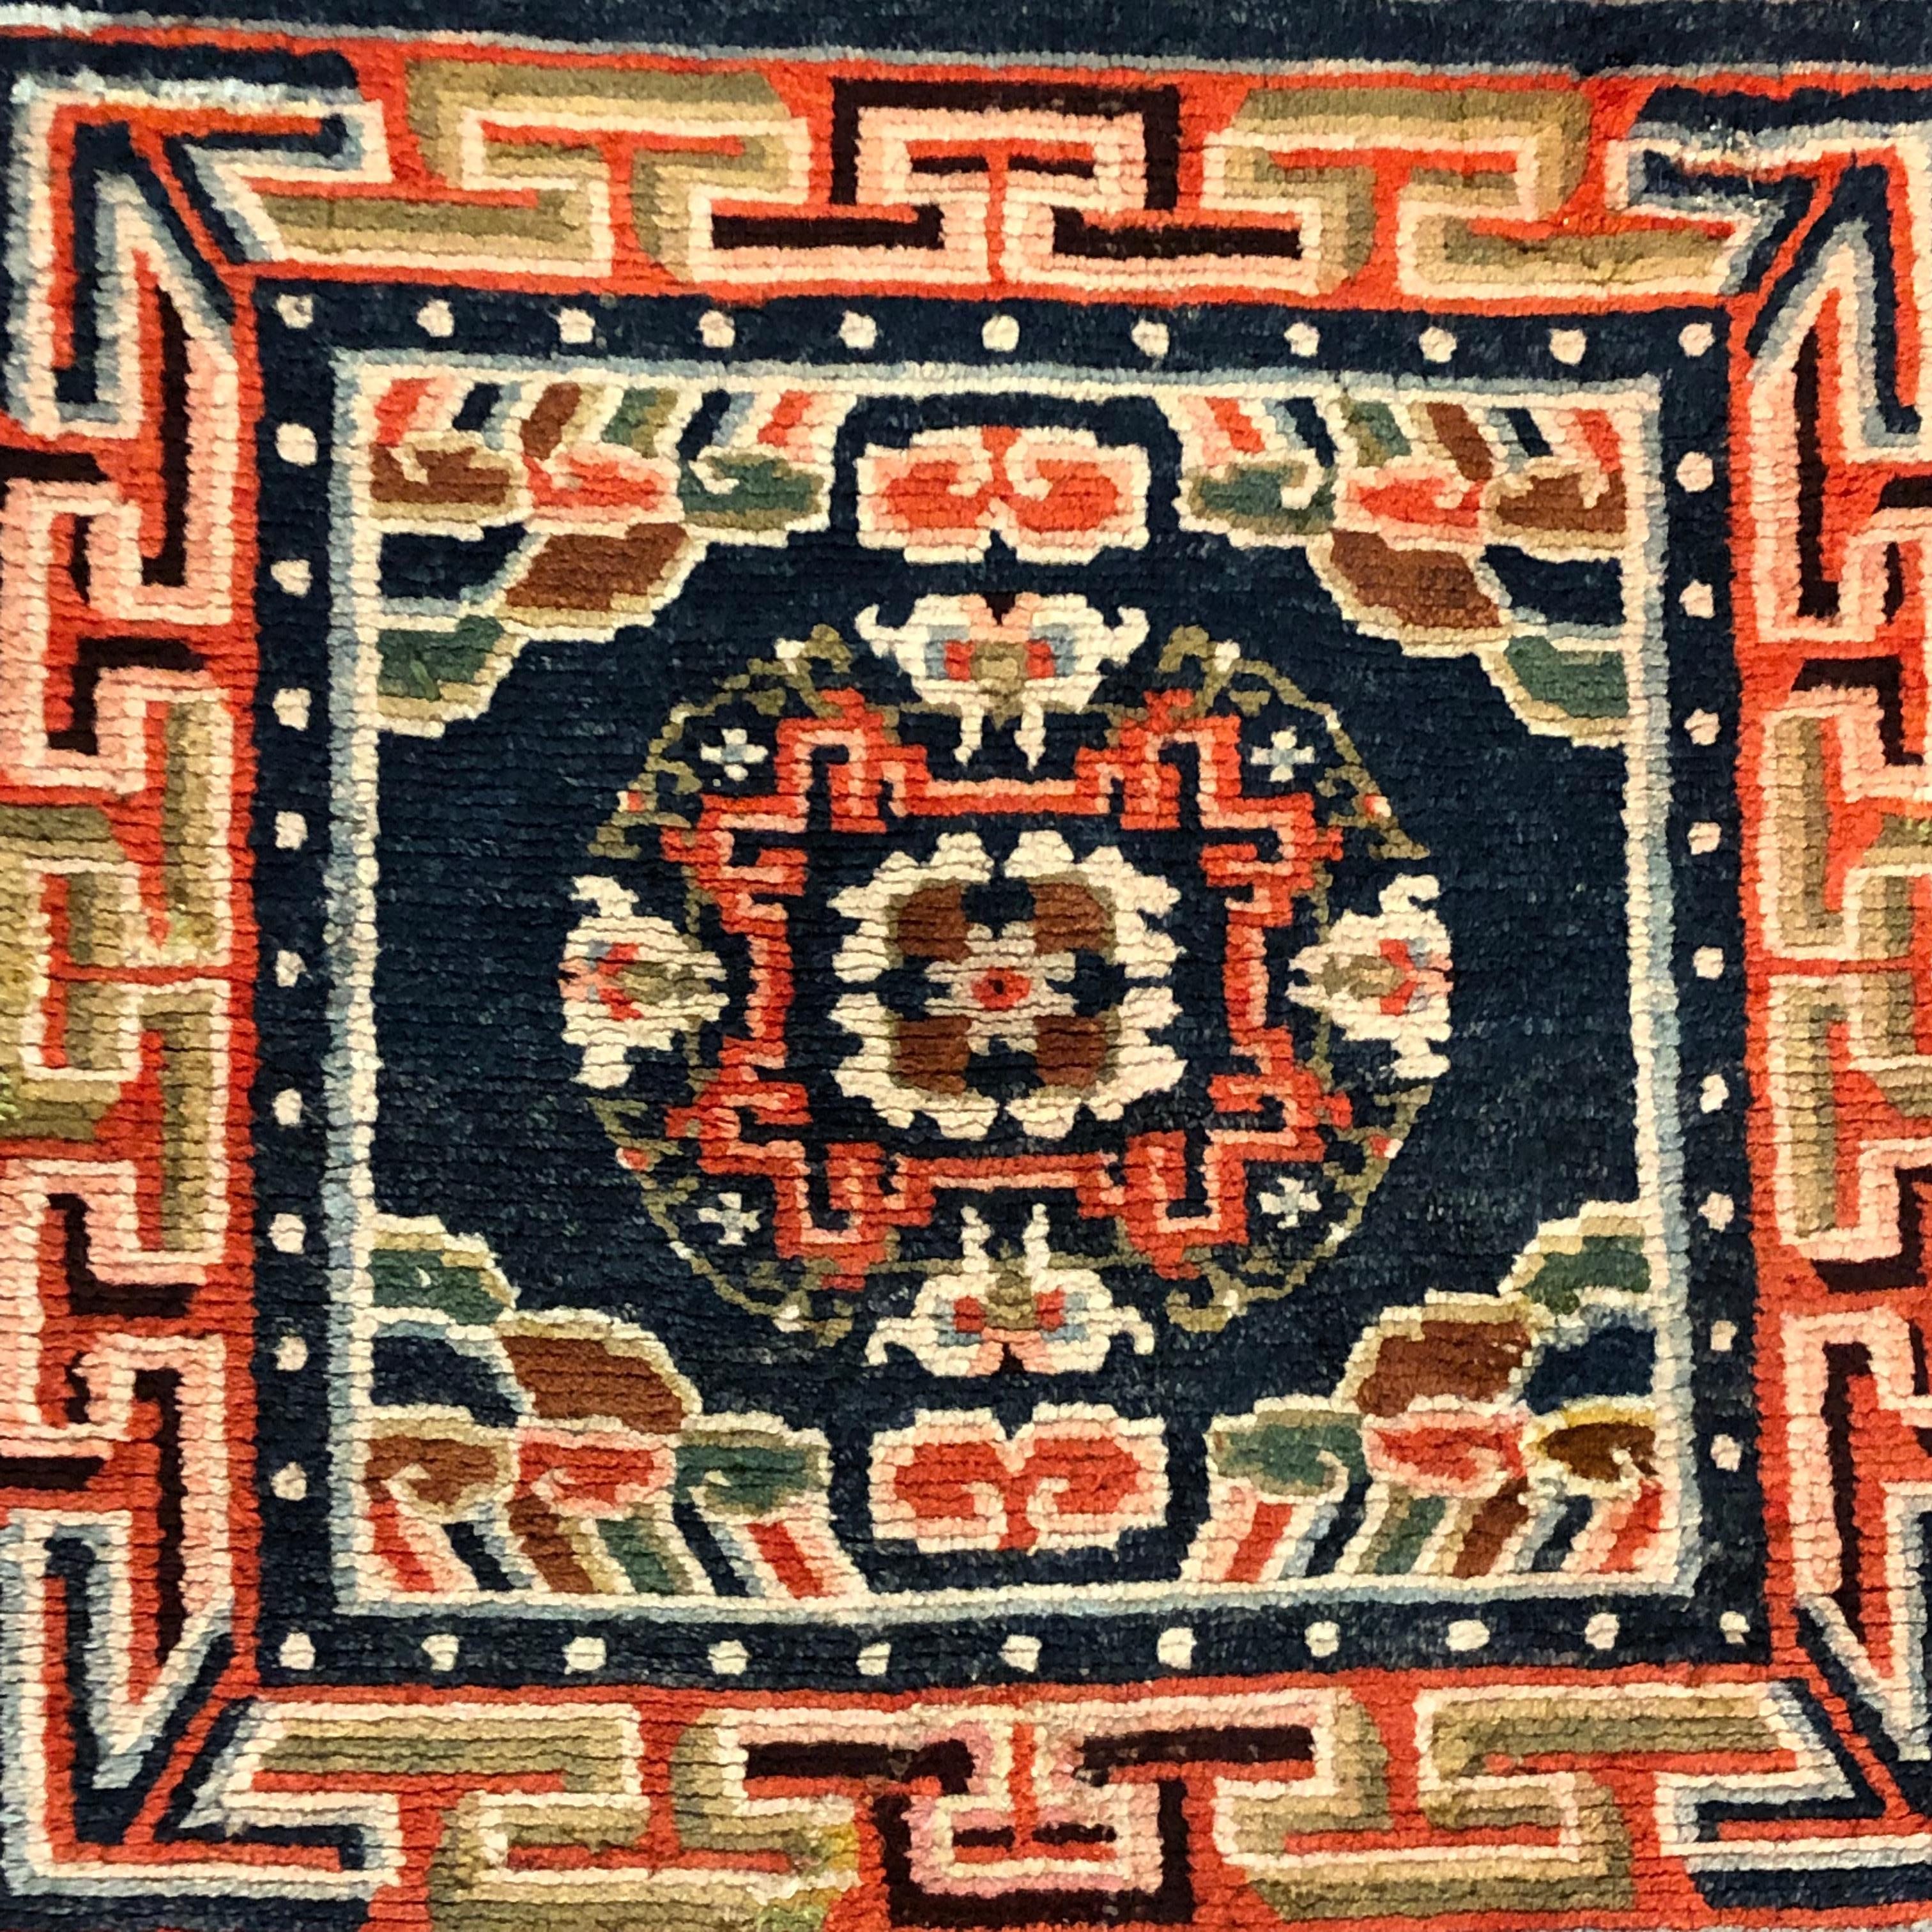 They are carpets that we used in Buddhist temples as a seat for parties or religious services. Knotted in Tibet were in large numbers exported to Nepal.
The decoration is characterized by five square modular elements, which correspond to the seats.